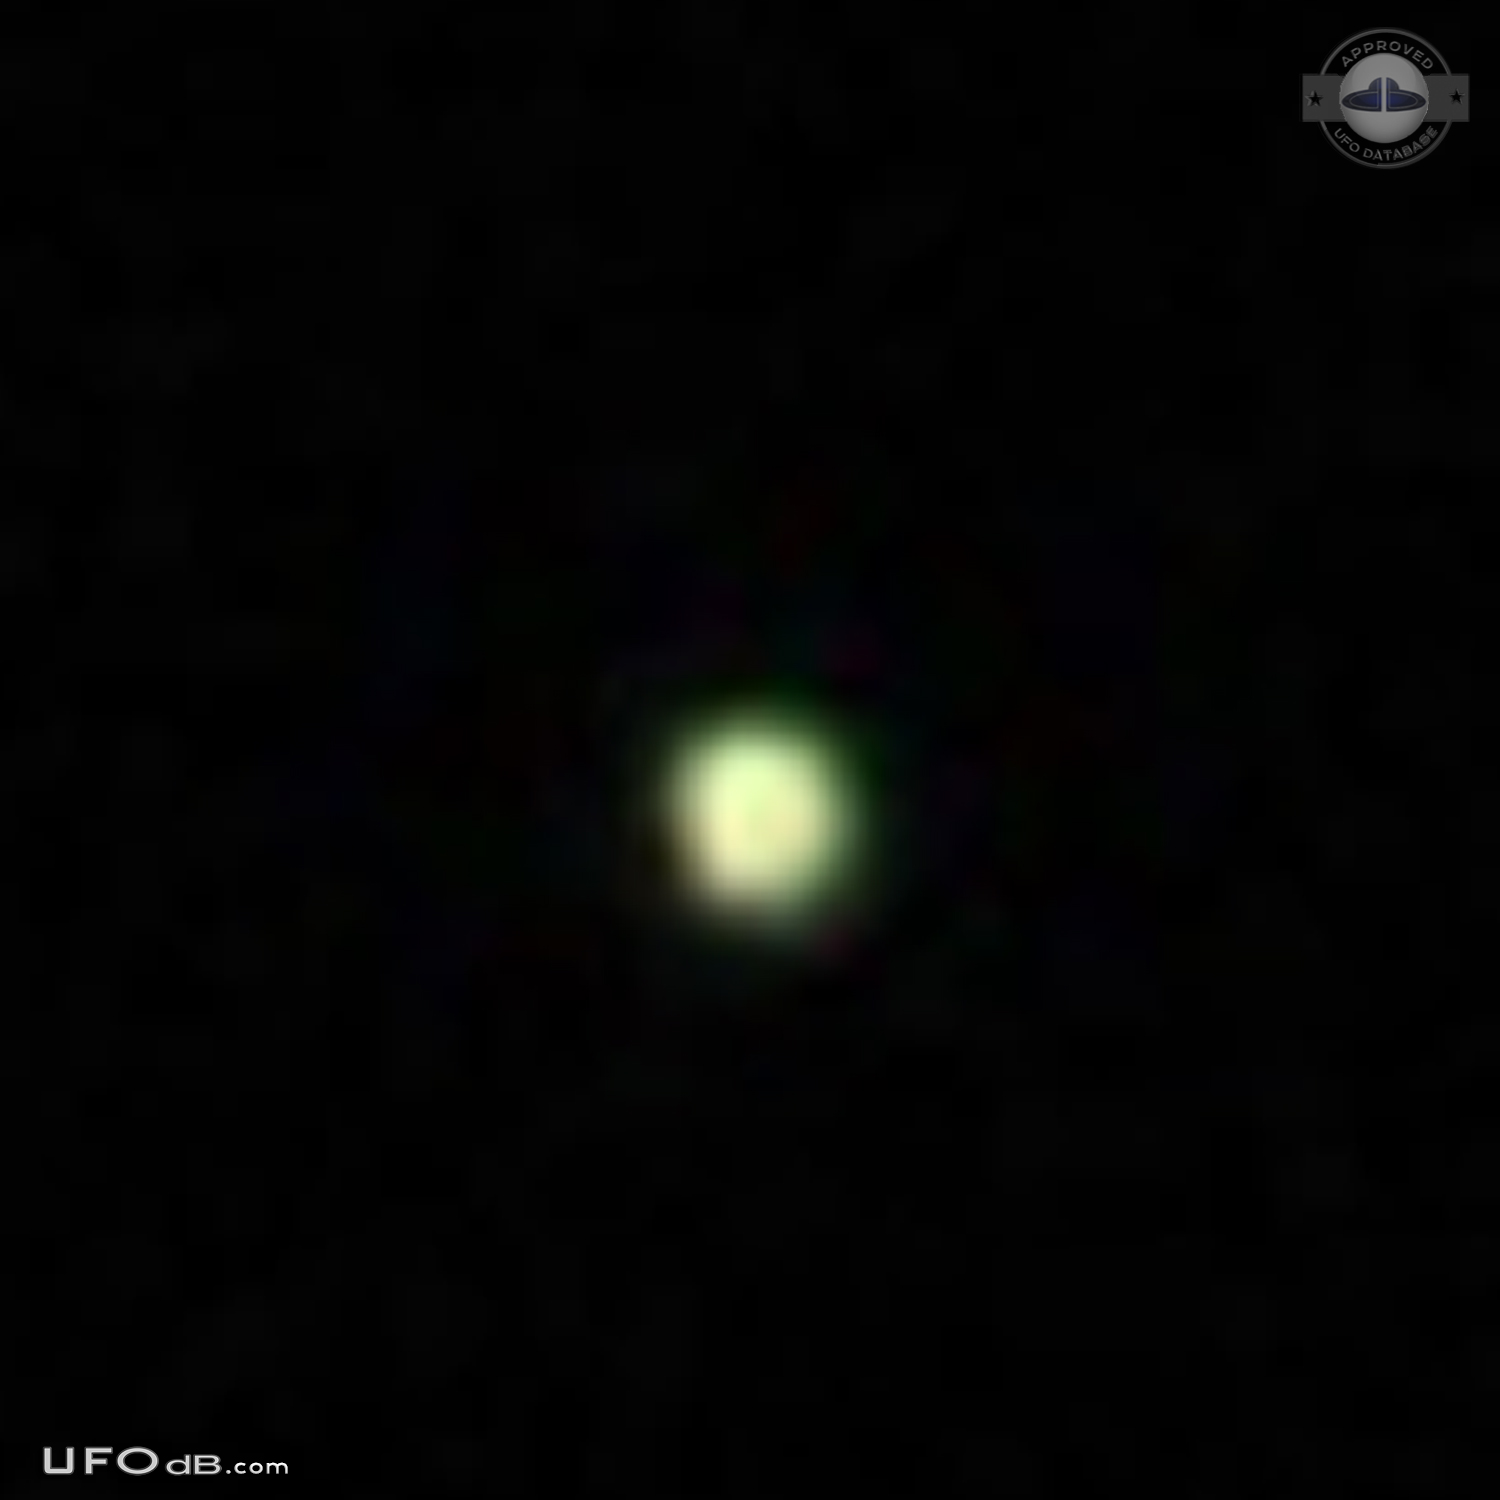 Very bright star UFO over Port Moresby, Papua New Guinea January 2015 UFO Picture #594-3